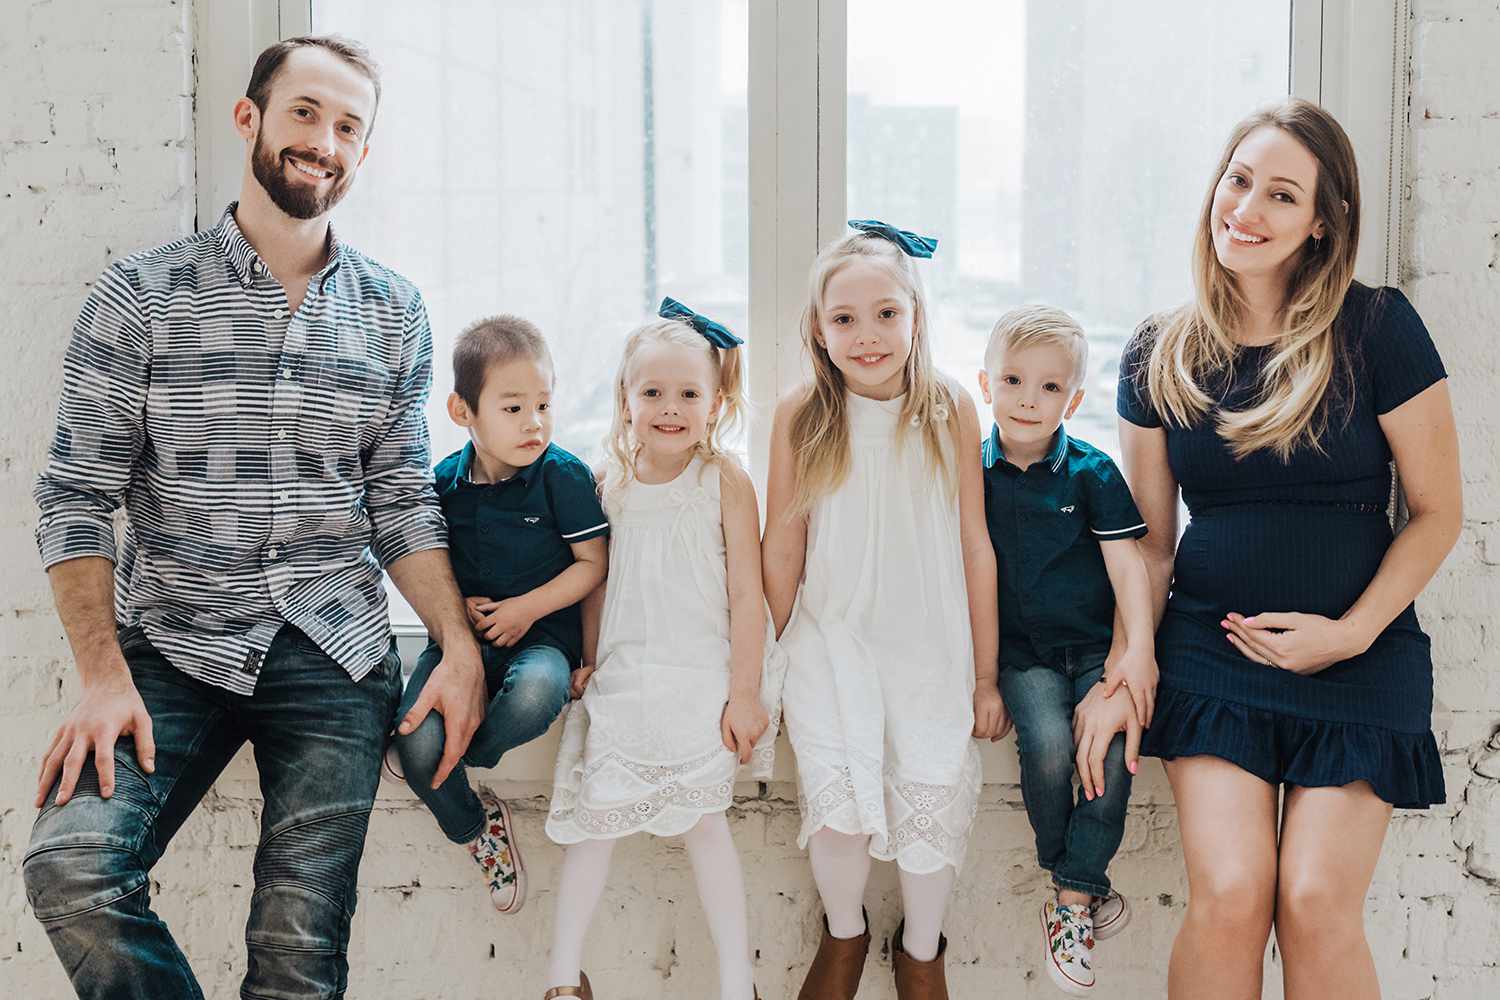 YouTuber Myka Stauffer Said Her Child Was 'Not Returnable' Before Viral Adoption Dissolution Scandal